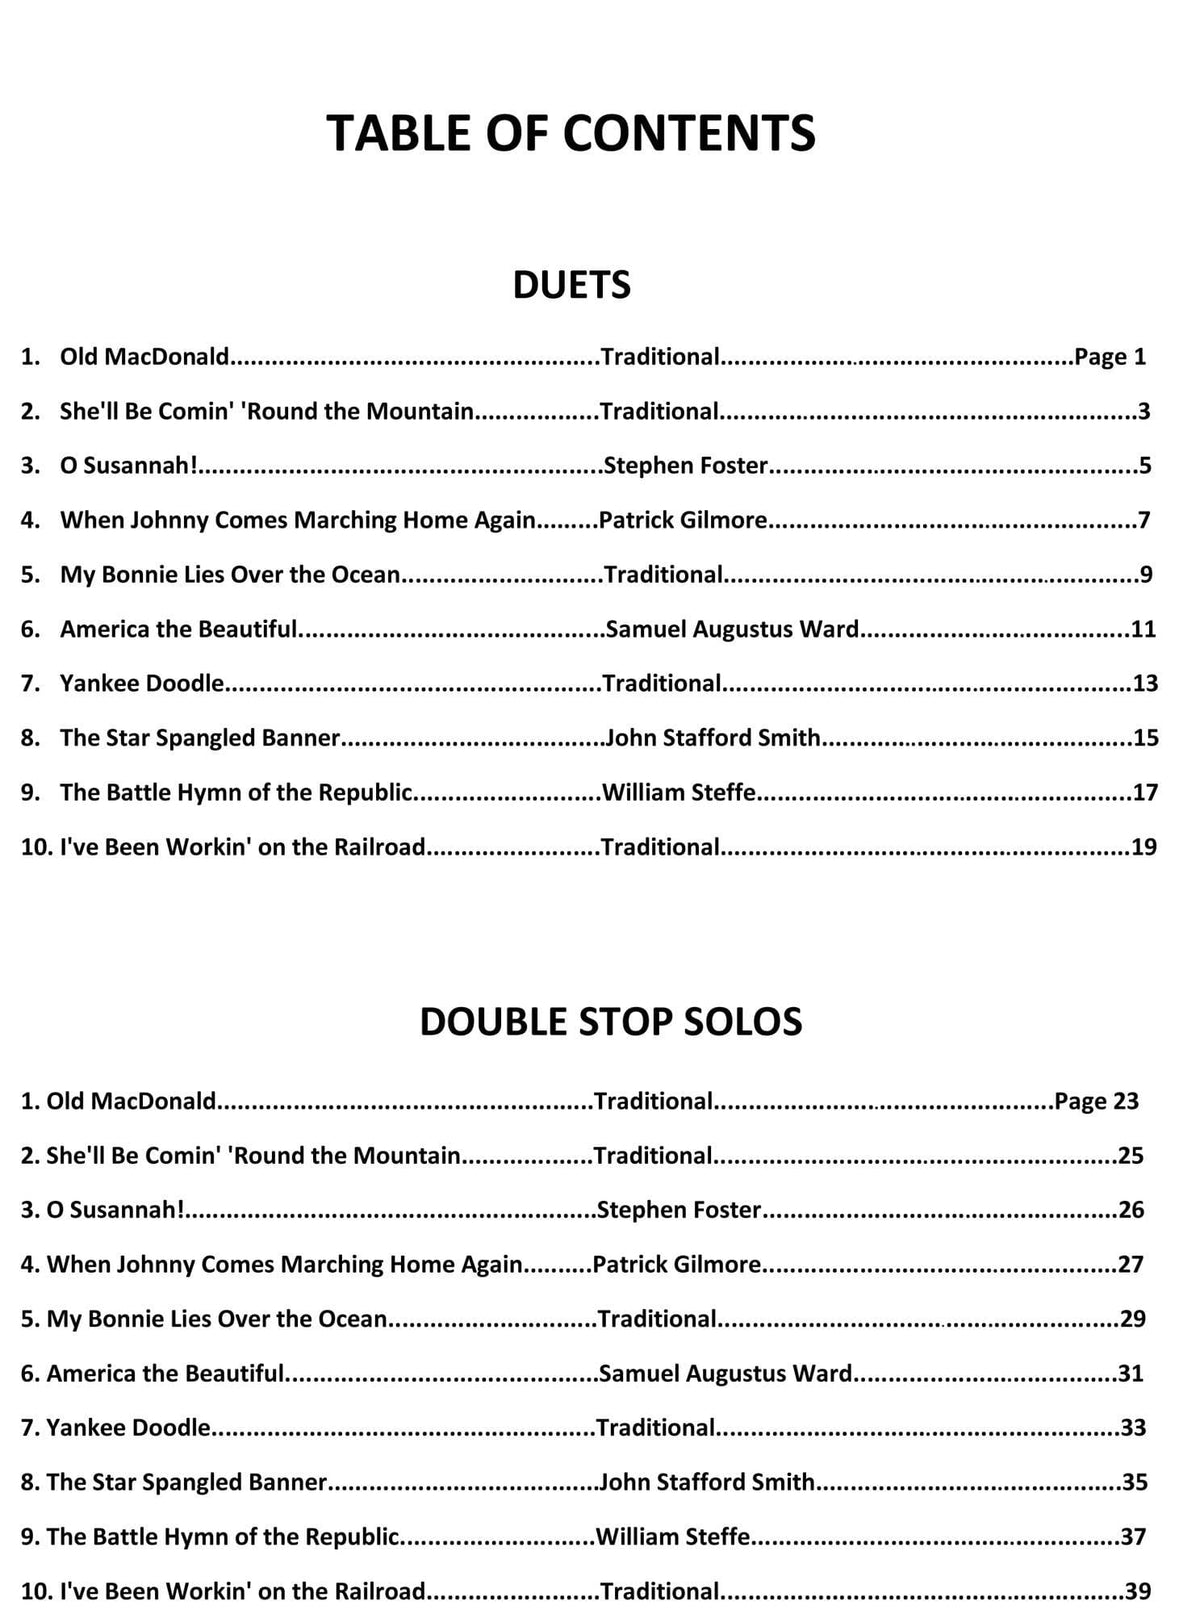 Yasuda, Martha - American Melodies: Double Stop Solos and Duets For Viola, Volume II - Digital Download